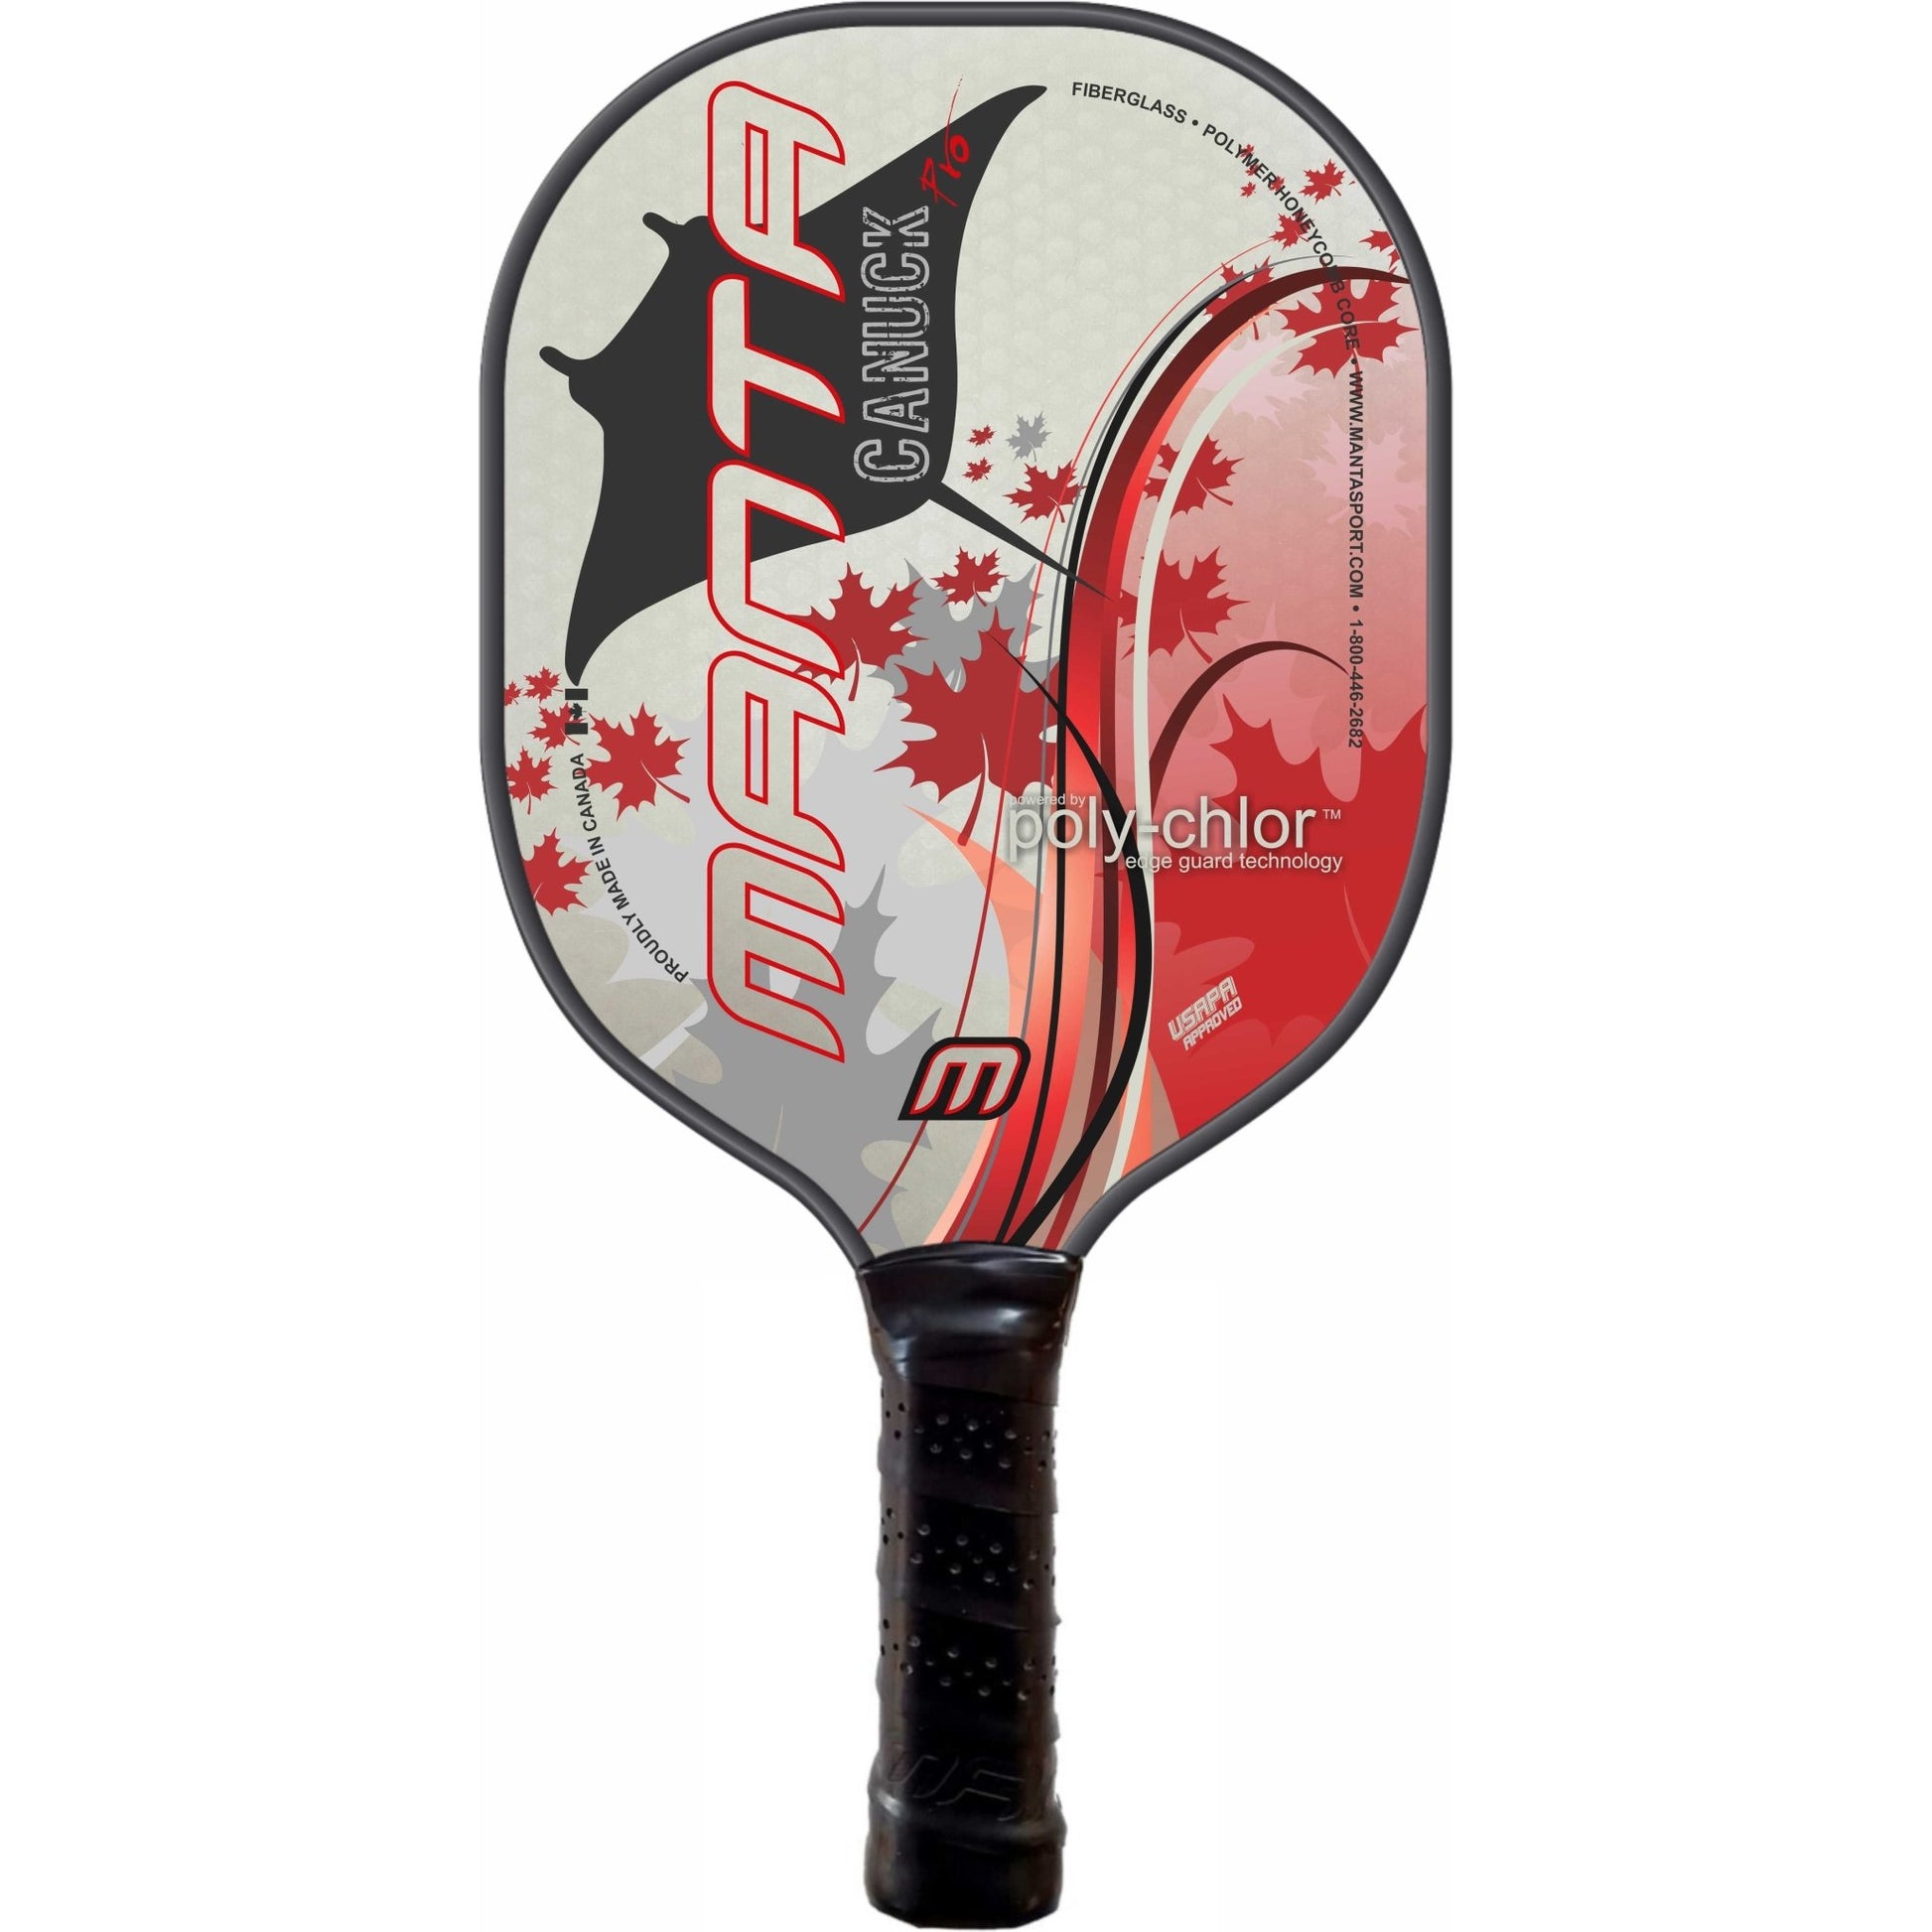 CANUCK PRO PROVINCIAL EDITION - Grip On Golf & Pickleball Zone